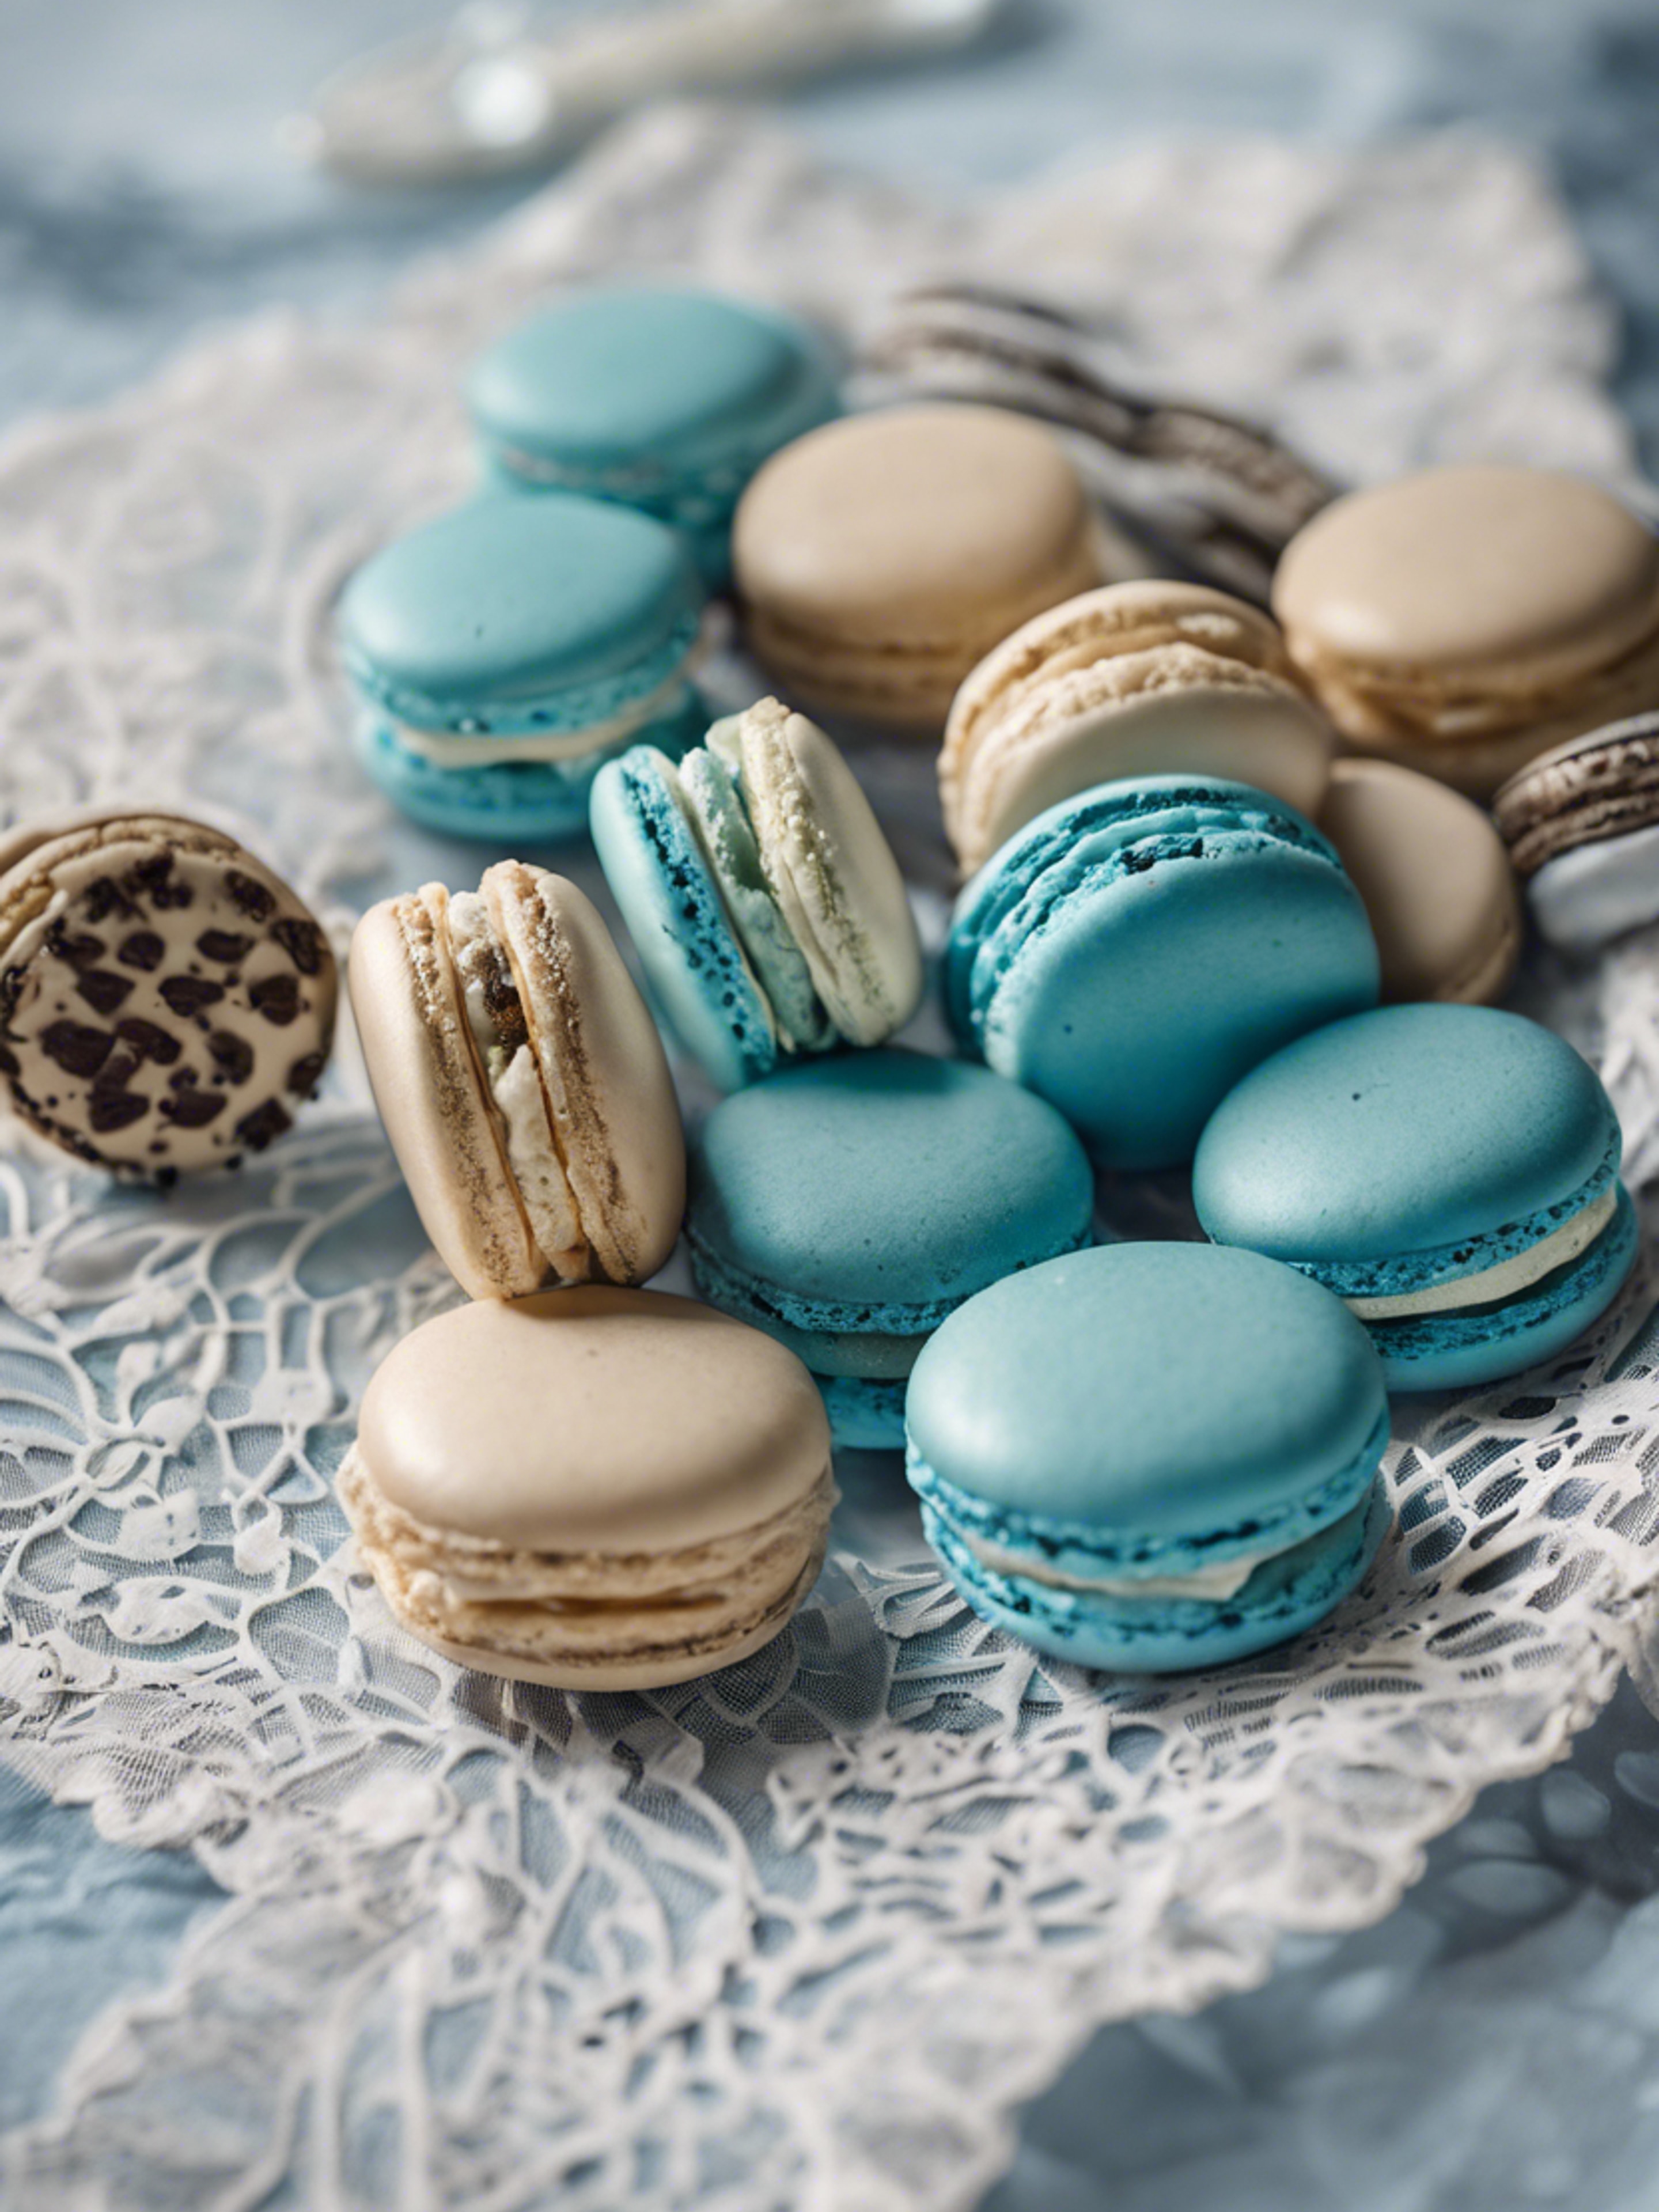 Blue French Macarons artistically arranged on an antique white lace tablecloth.壁紙[73469cabdbbf44728762]